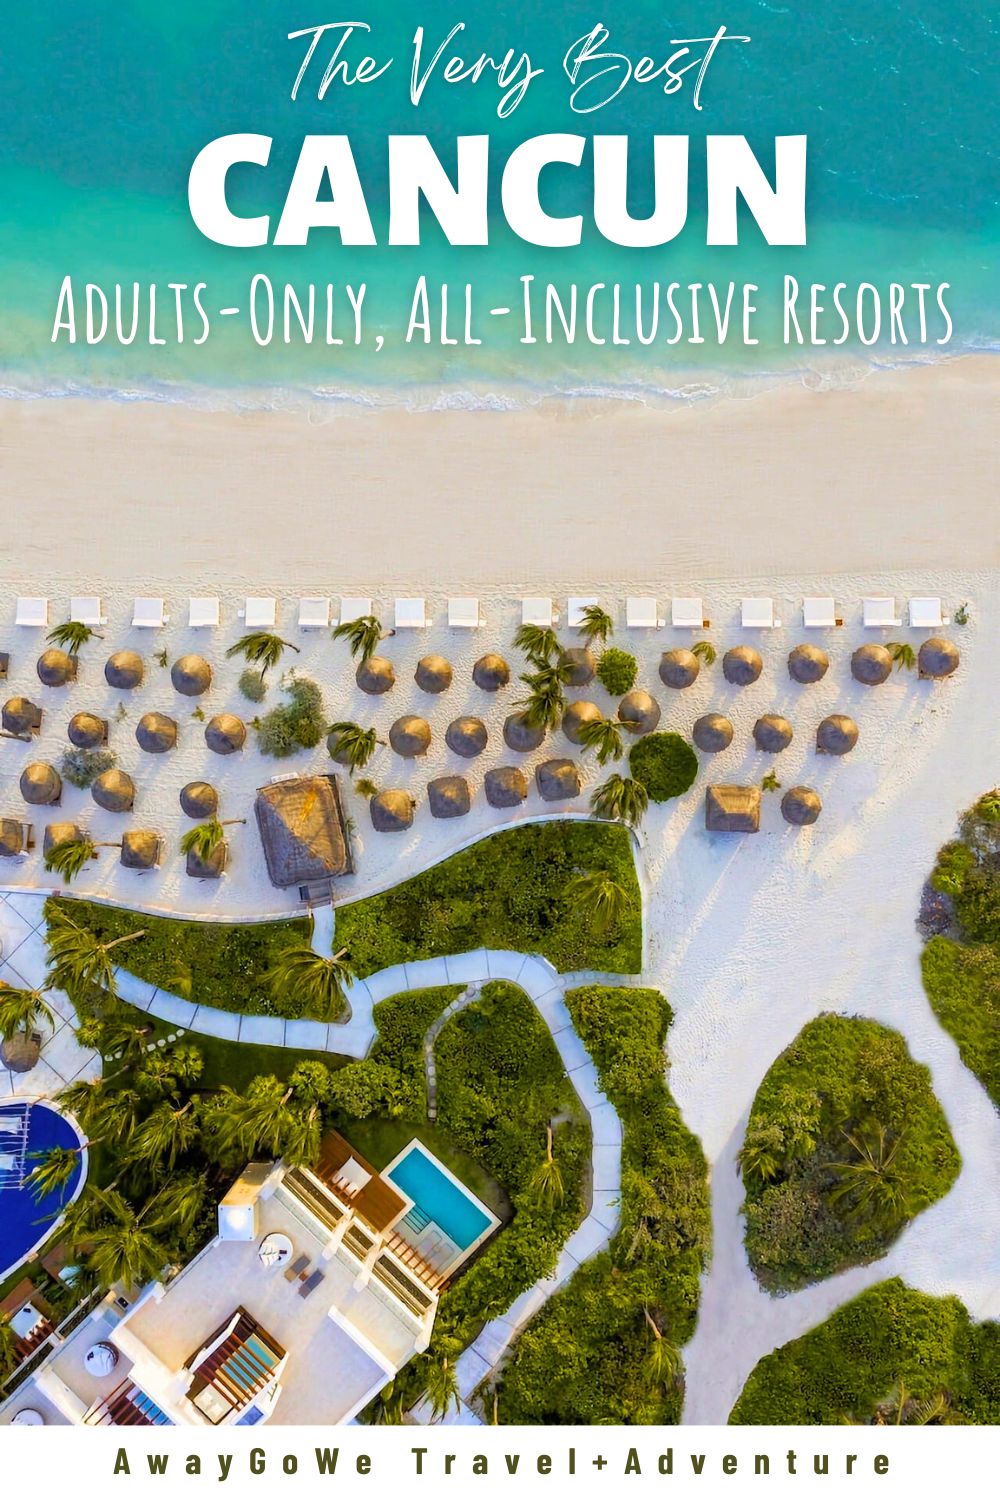 Cancun adults-only all-inclusive resorts